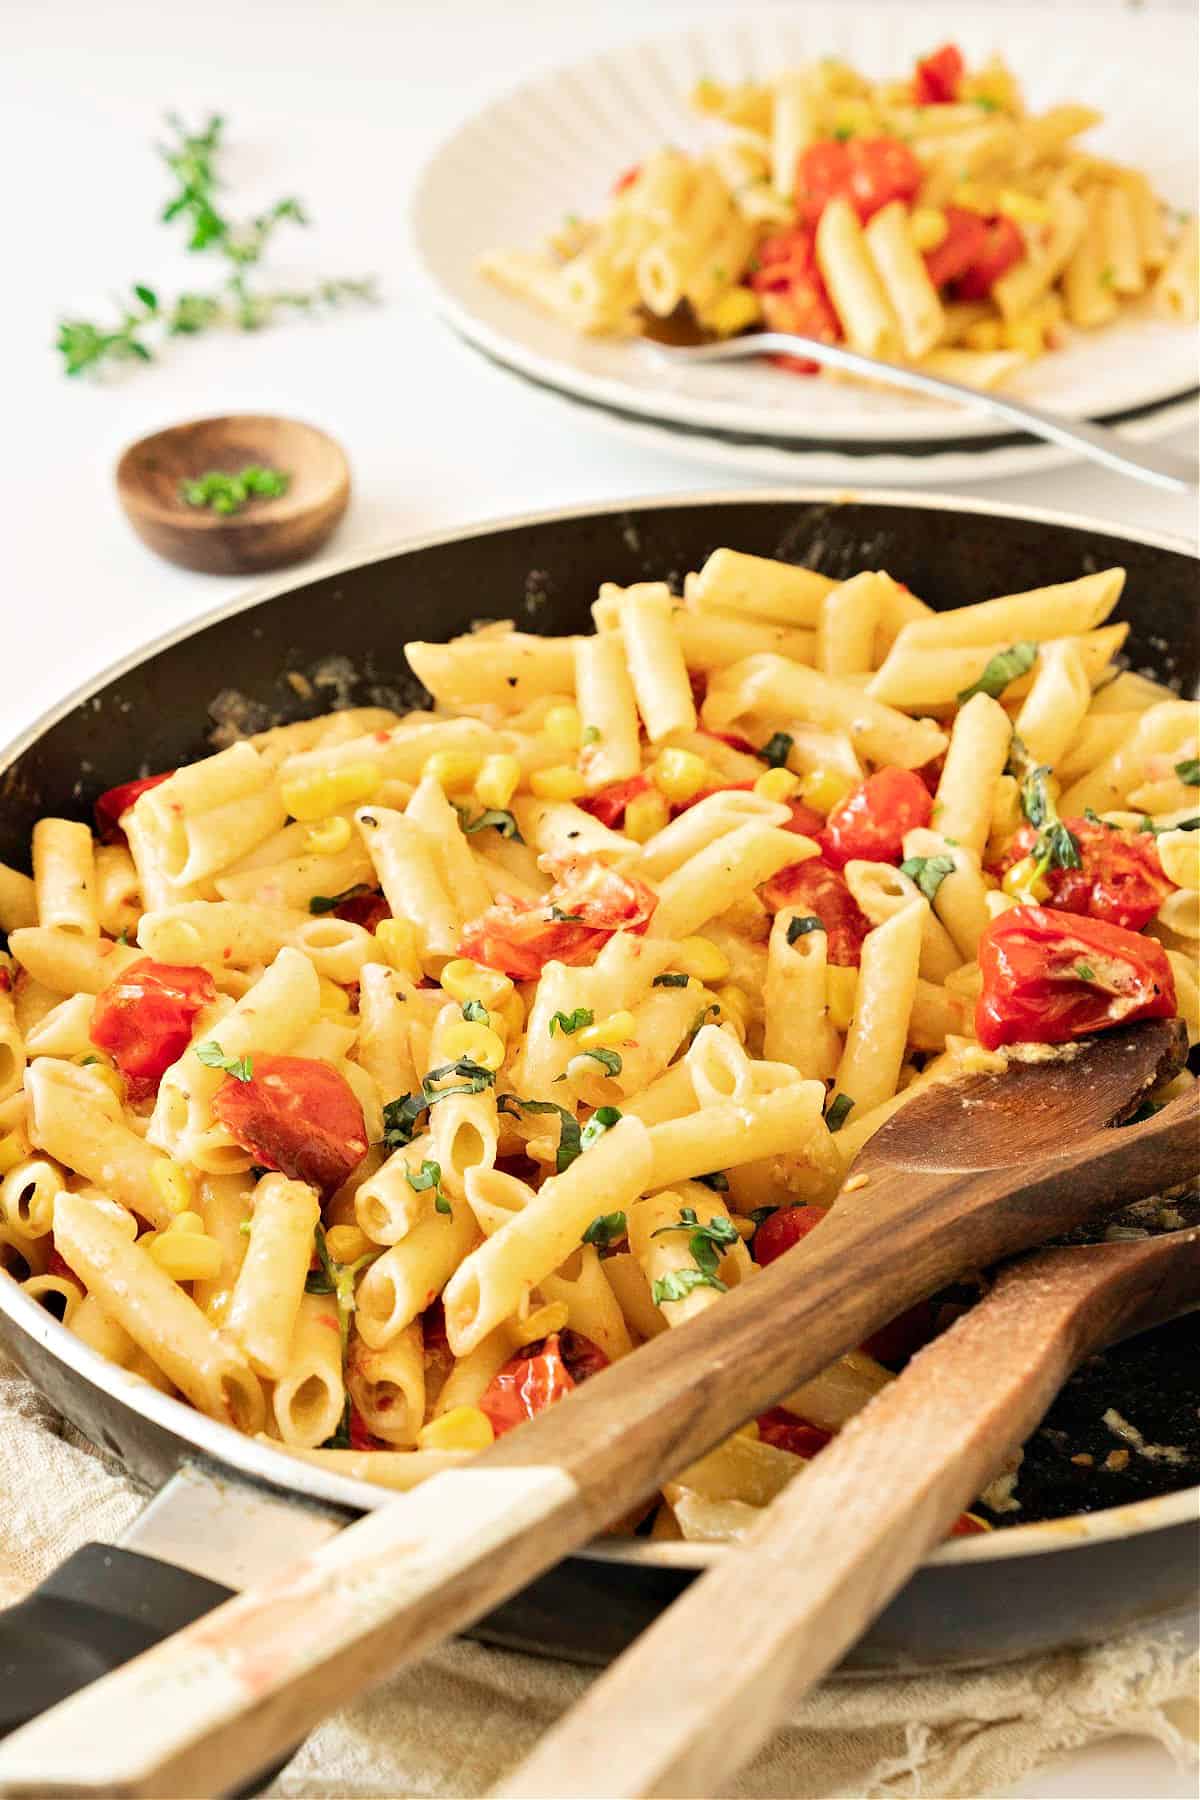 Black skillet and white plate with corn, tomato pasta. Wooden spoons.